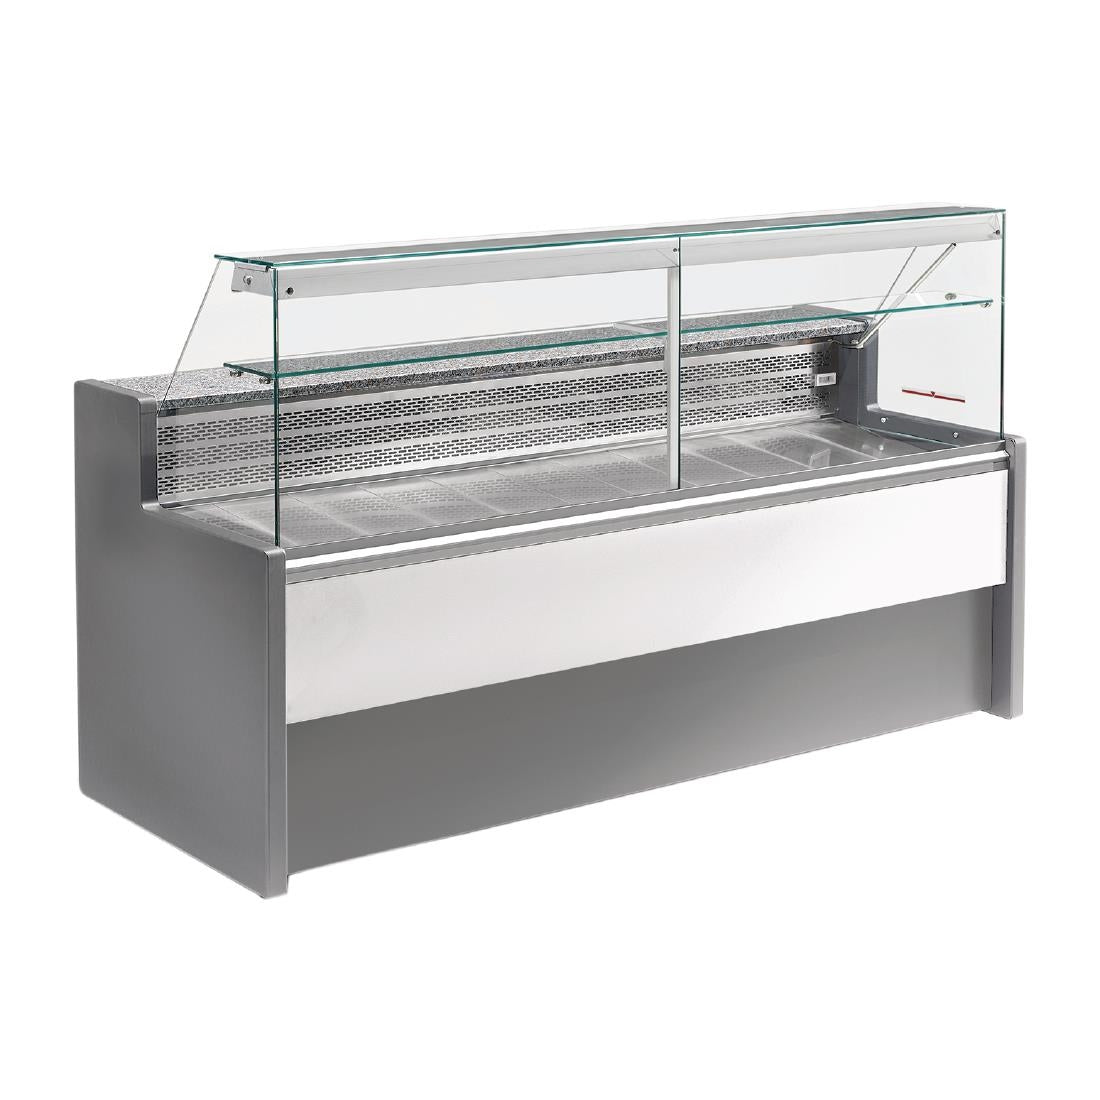 FP924-100 Zoin Tibet Serve Over Counter Grey 1000mm JD Catering Equipment Solutions Ltd